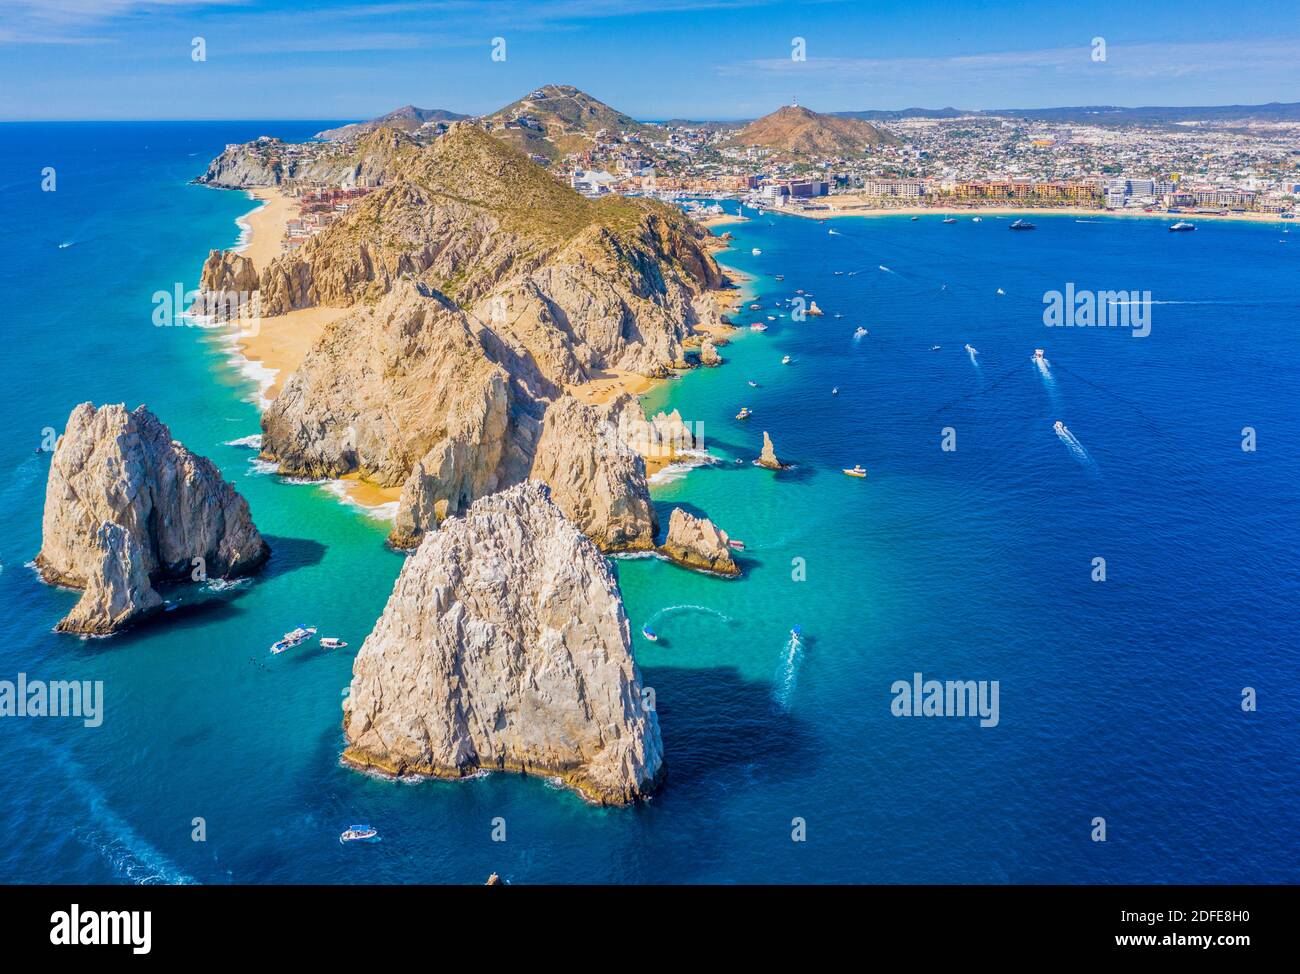 Aerial view looking west of Lands End, Cabo San Lucas, Mexico, Baja California Sur, where the Sea of Cortez meets the Pacific Ocean Stock Photo